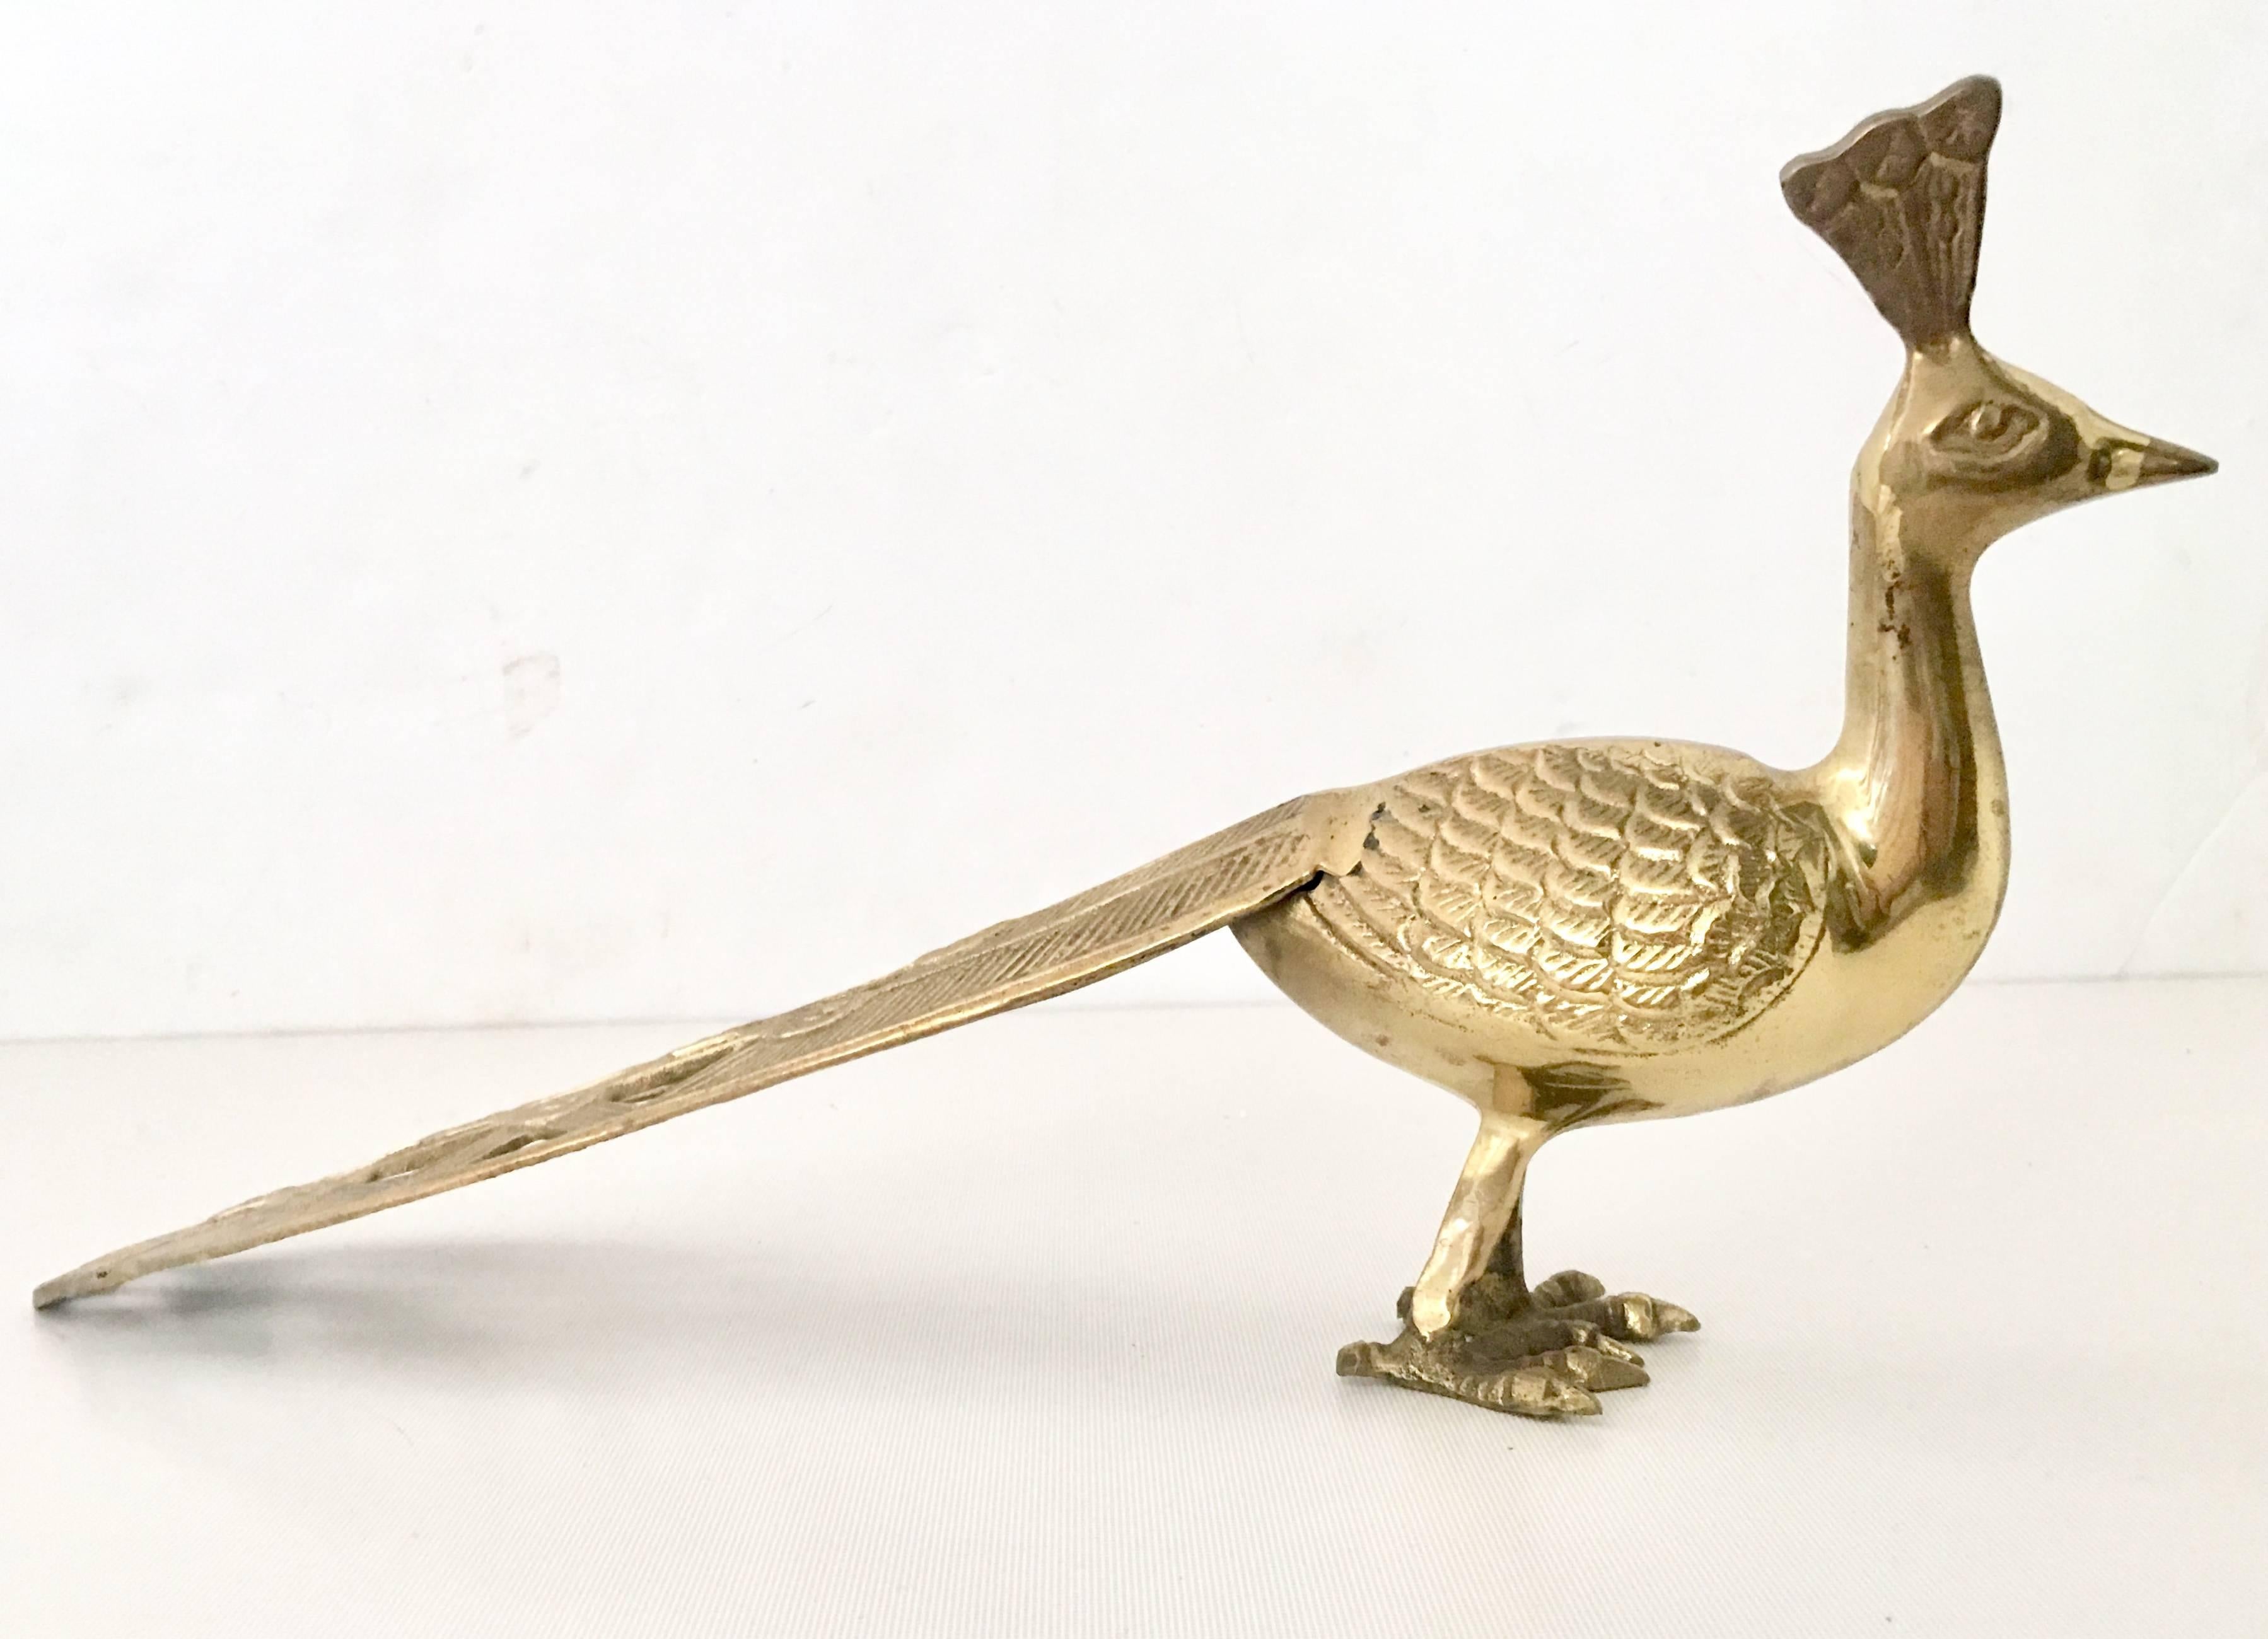 20th Century Art Nouveau style long tail solid brass peacock sculpture.